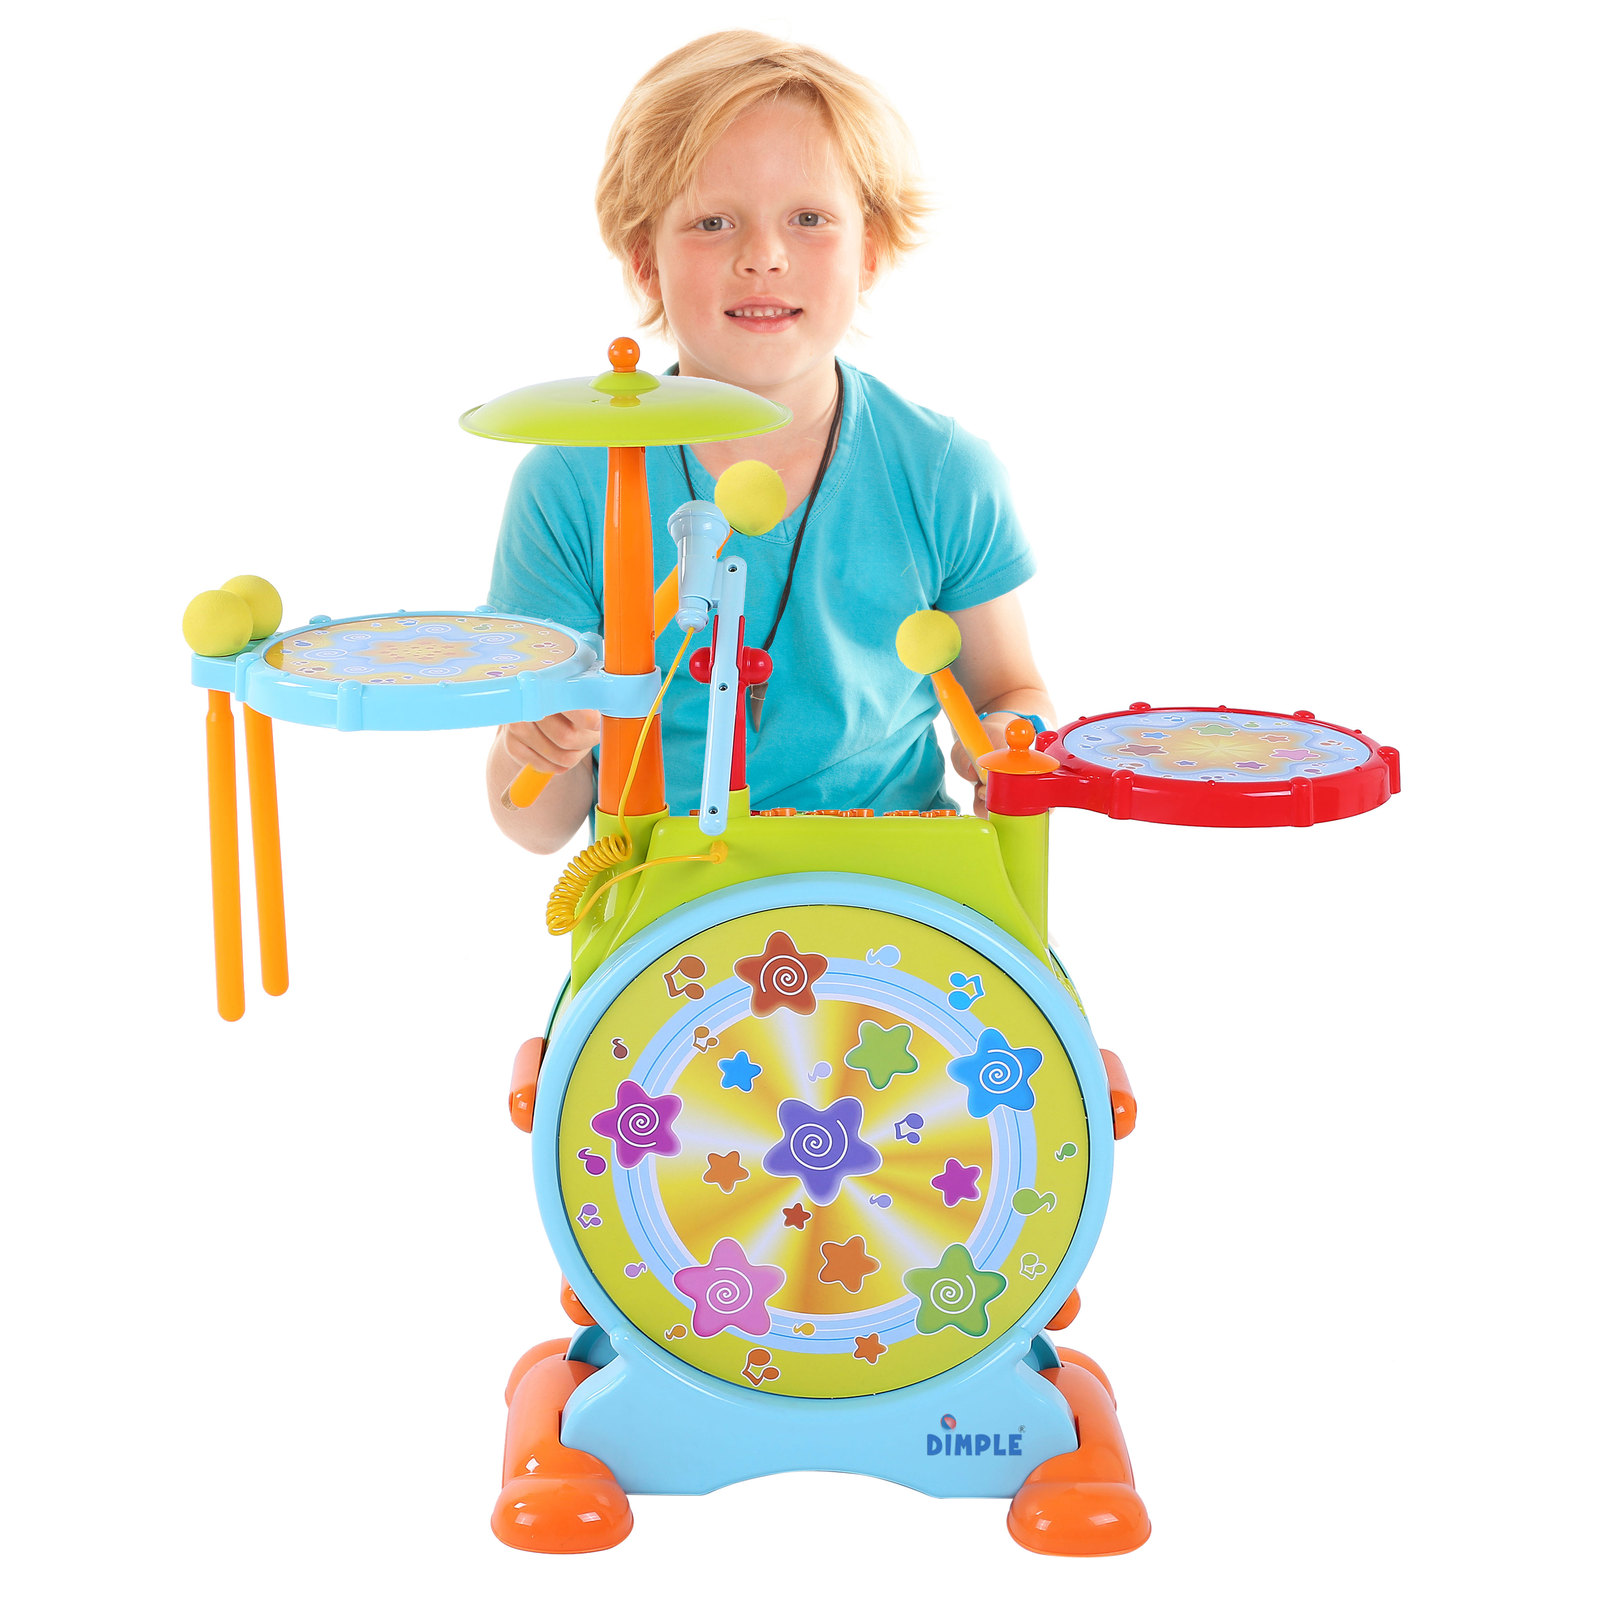 Microphone Pedal & Stool Electric Big Toy Drum Set For Kids By Dimple